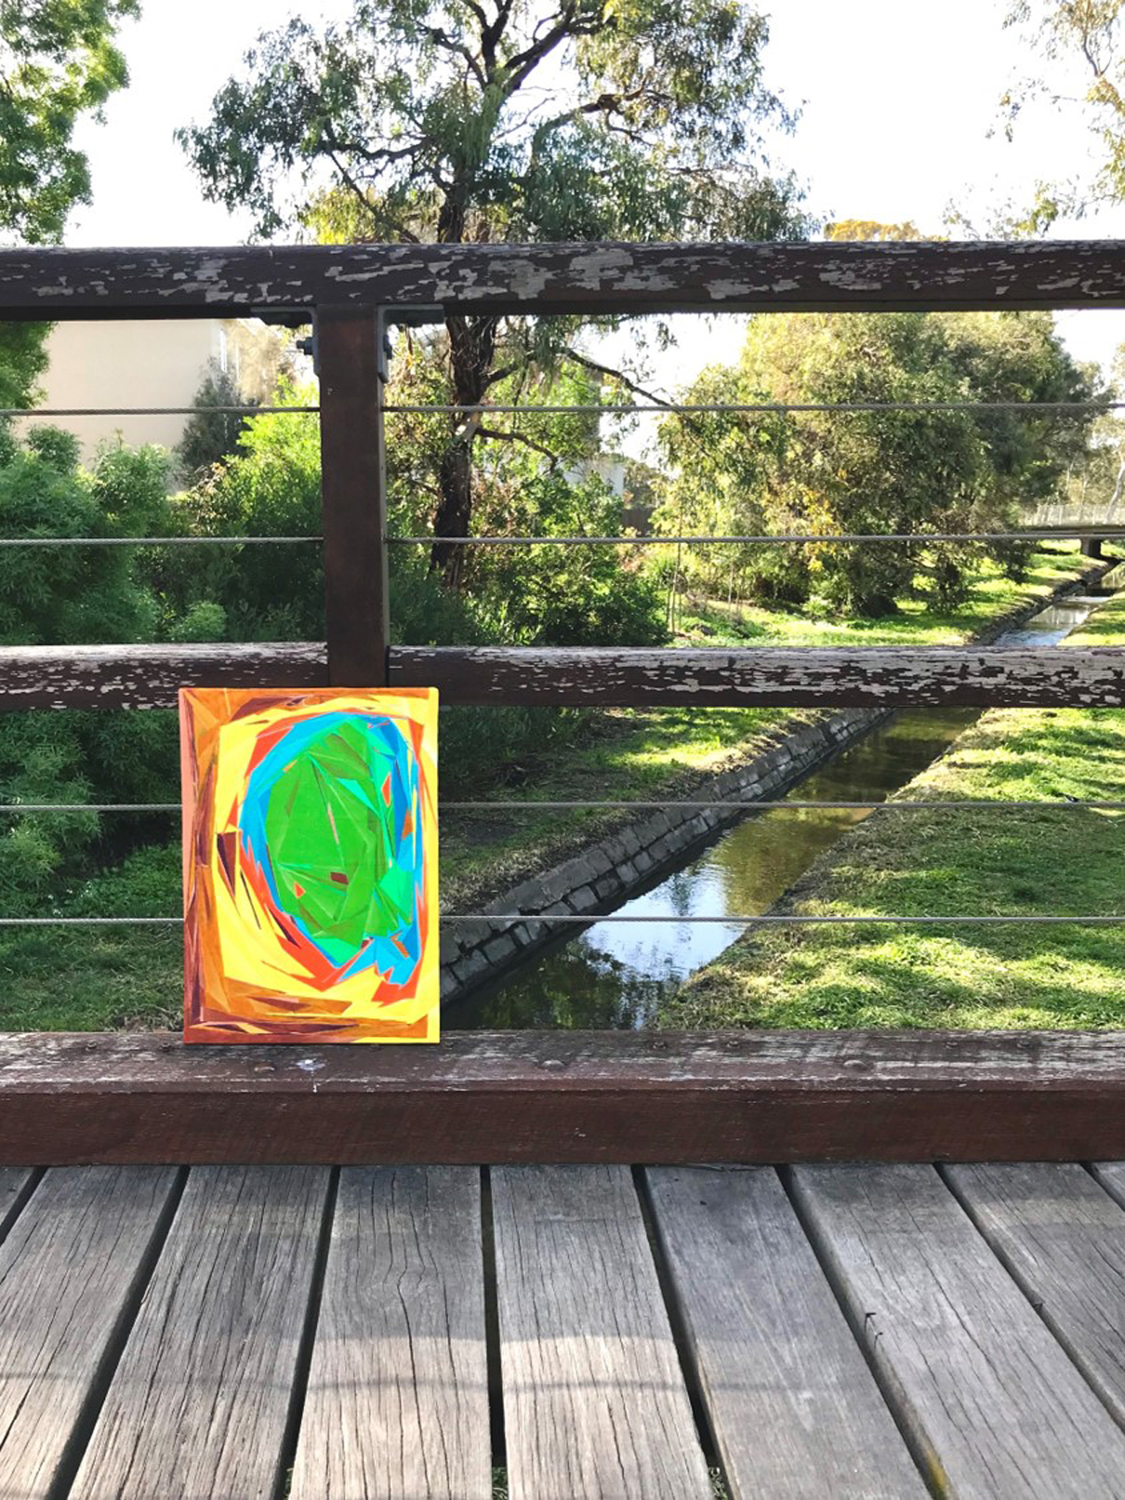 A digital photograph of the installation of the painting titled "Not Pretending Anything" located on a bridge in a nature reserve and featuring a narrow canal.